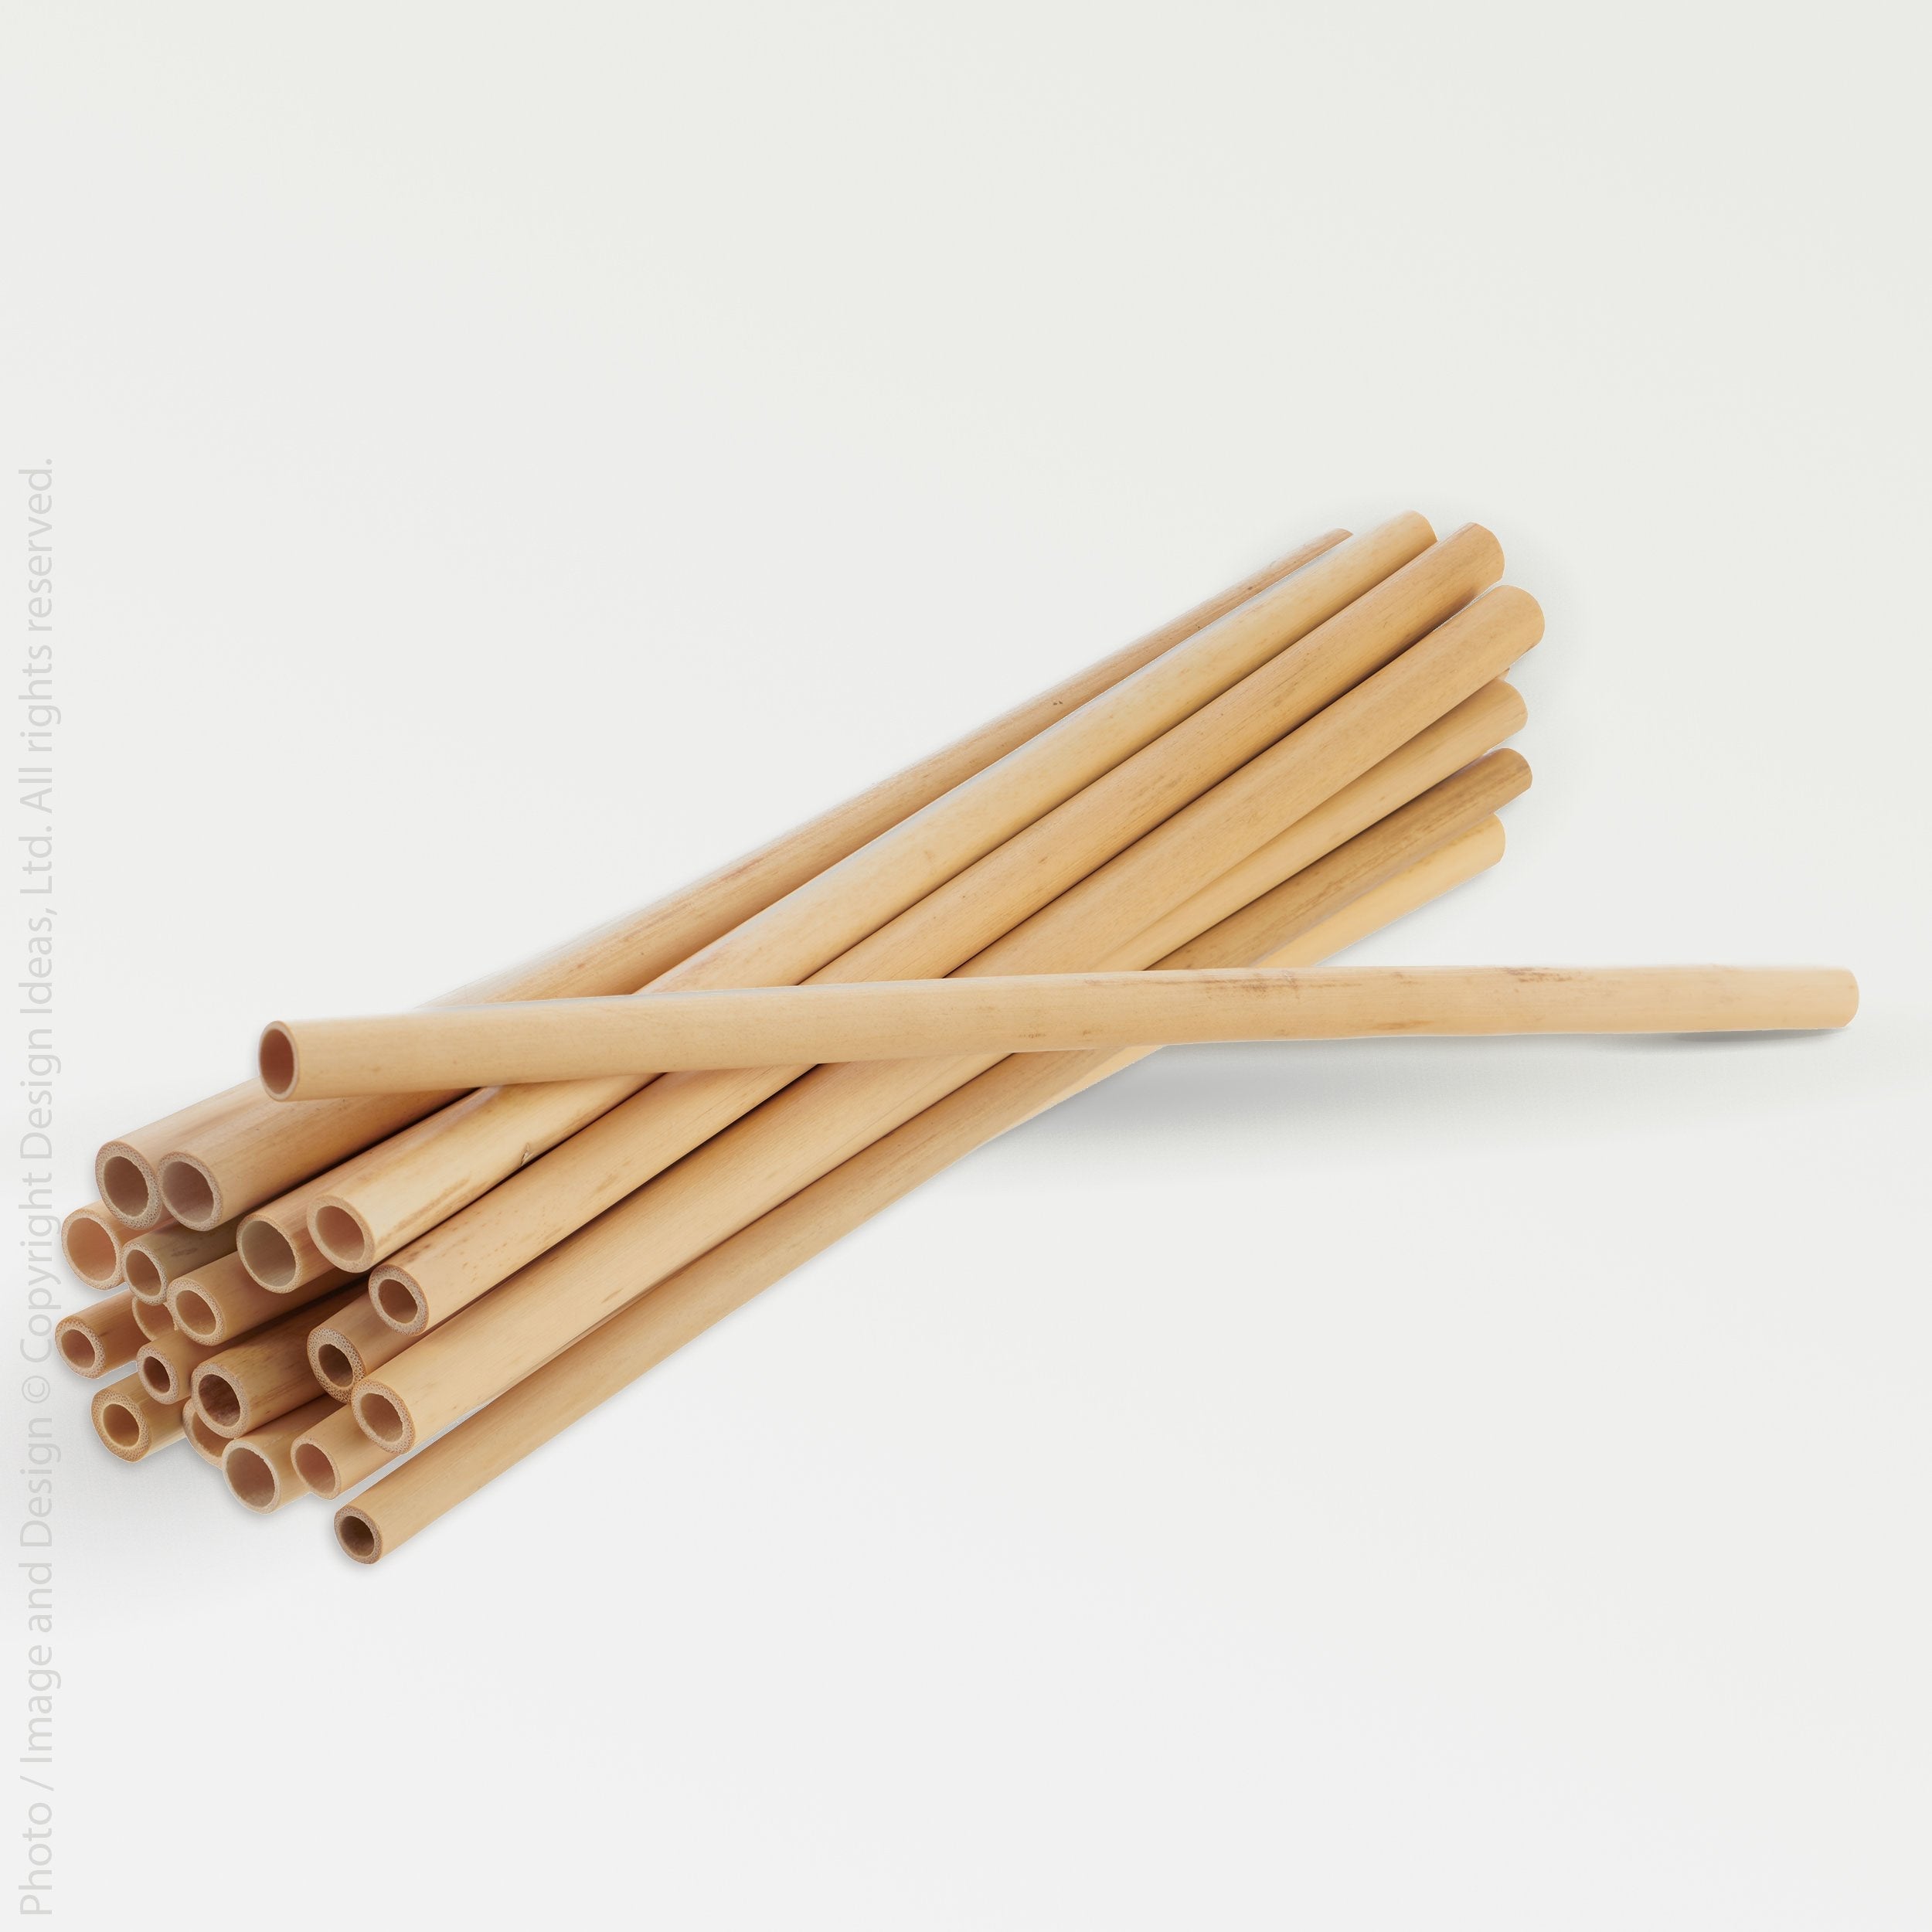 Singapore Bamboo Straws - Natural Color | Image 1 | From the Singapore Collection | Expertly made with natural bamboo for long lasting use | Available in natural color | texxture home